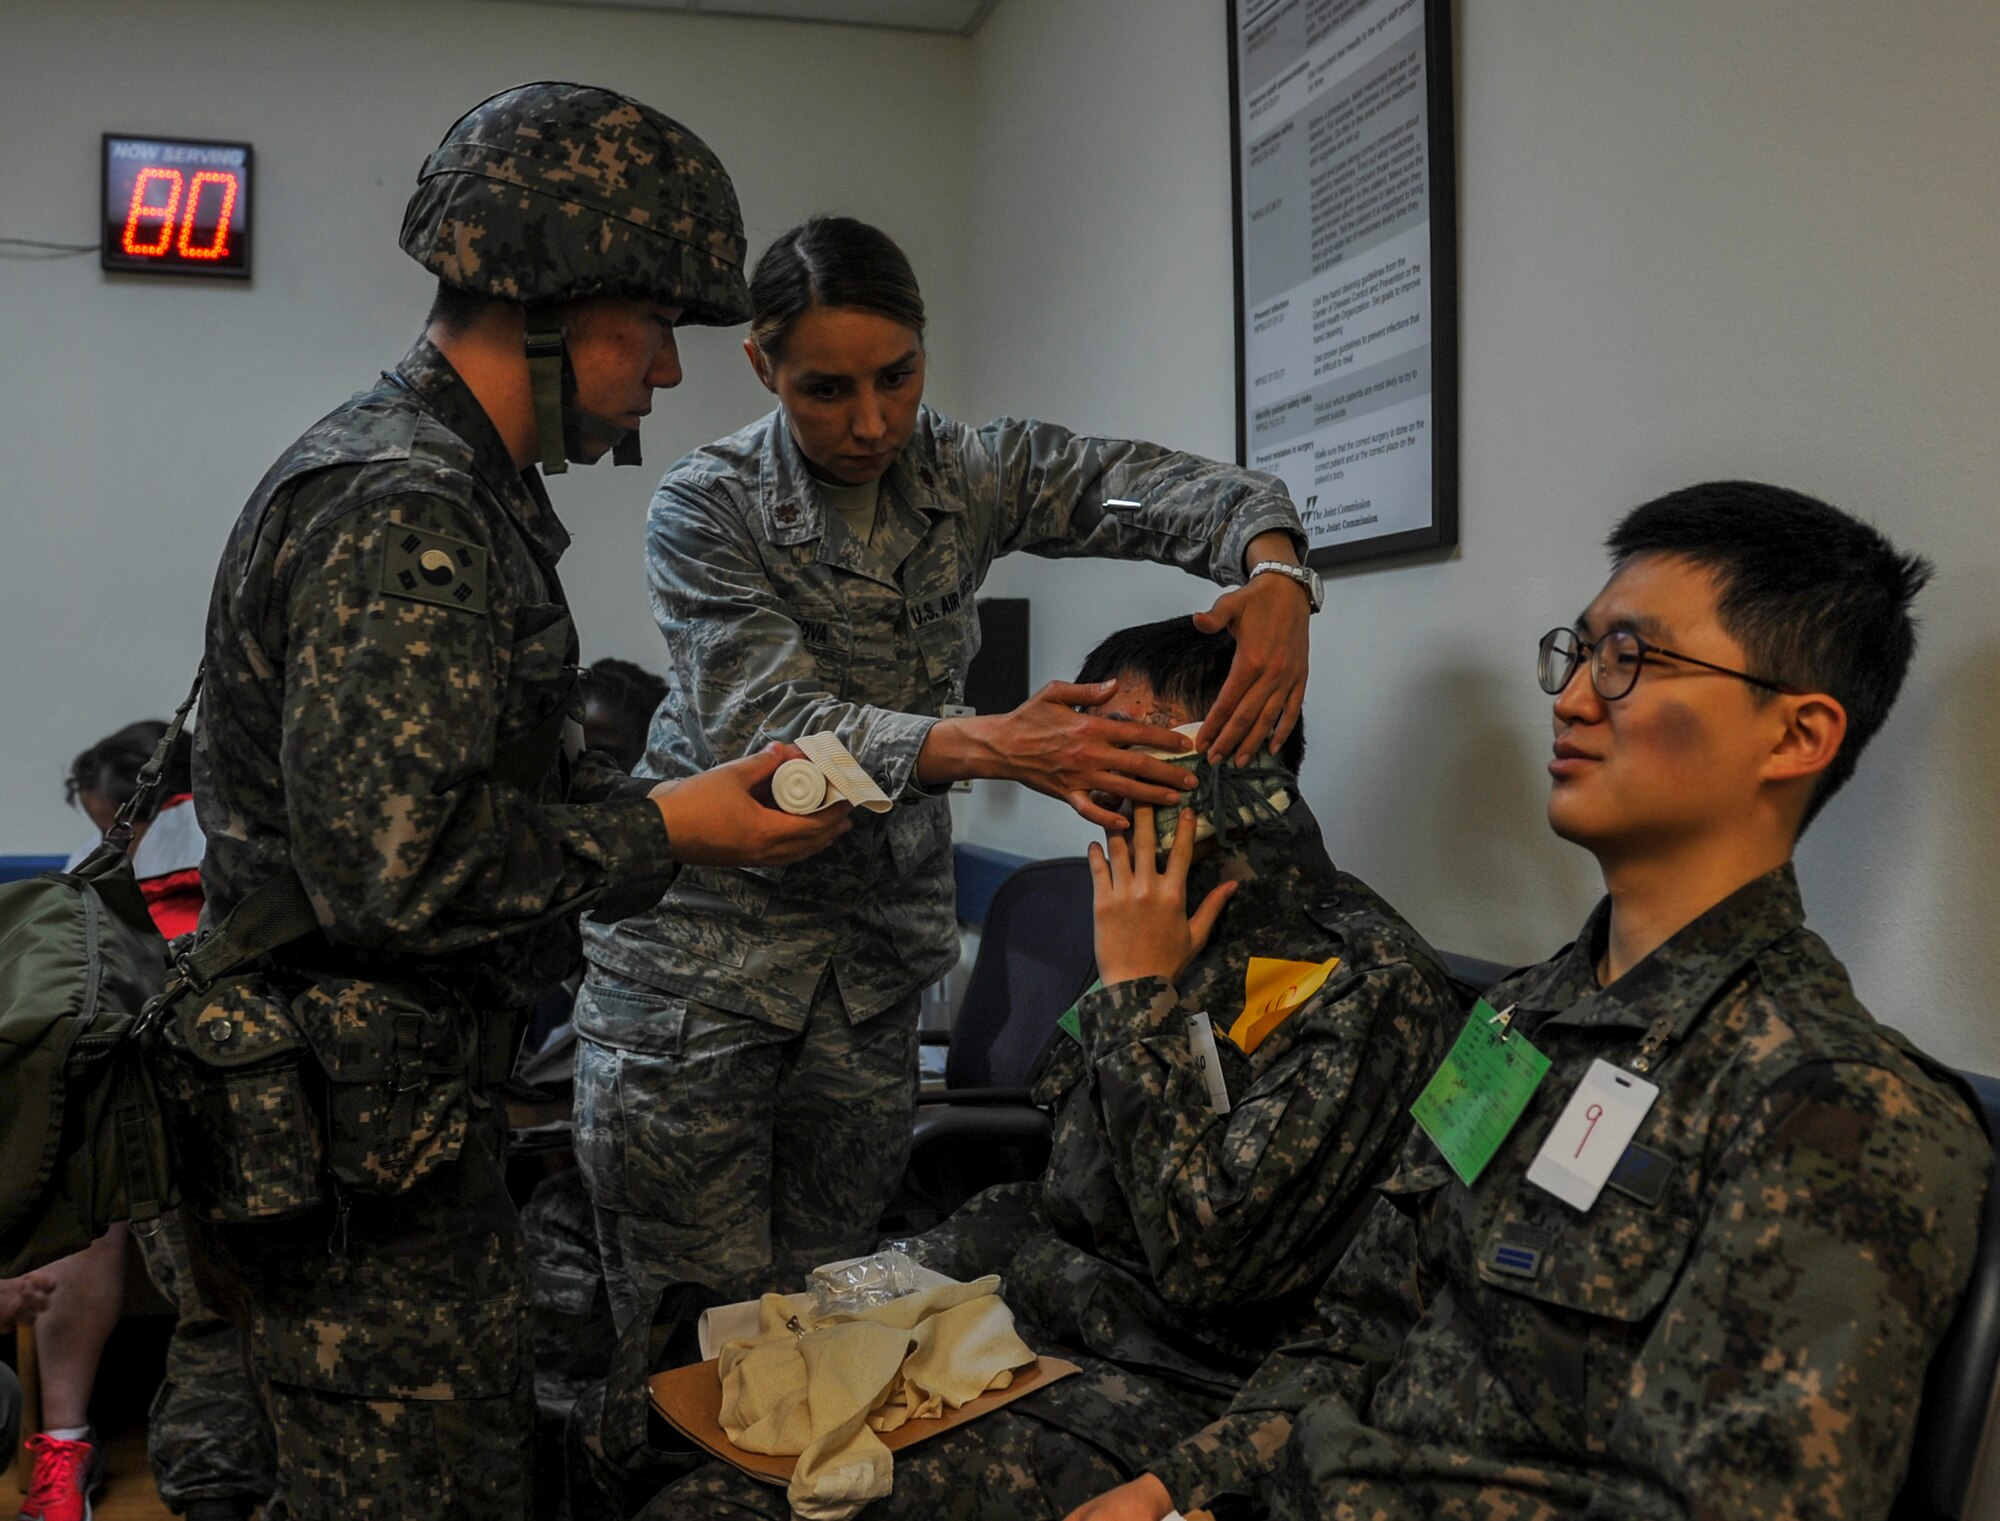 United States Air Force Maj. Anna Fedotova, 8th Medical Operation Squadron mental health flight chief, and a Republic of Korea Air Force medical airman work together to bandage a ROKAF airman’s head during a mass casualty exercise at Kunsan Air Base, Republic of Korea, April 19, 2017. U.S. and ROK airmen conducted the training to evaluate their ability to communicate and operate through a MASCAL situation. (U.S. Air Force photo by Senior Airman Colville McFee/Released)